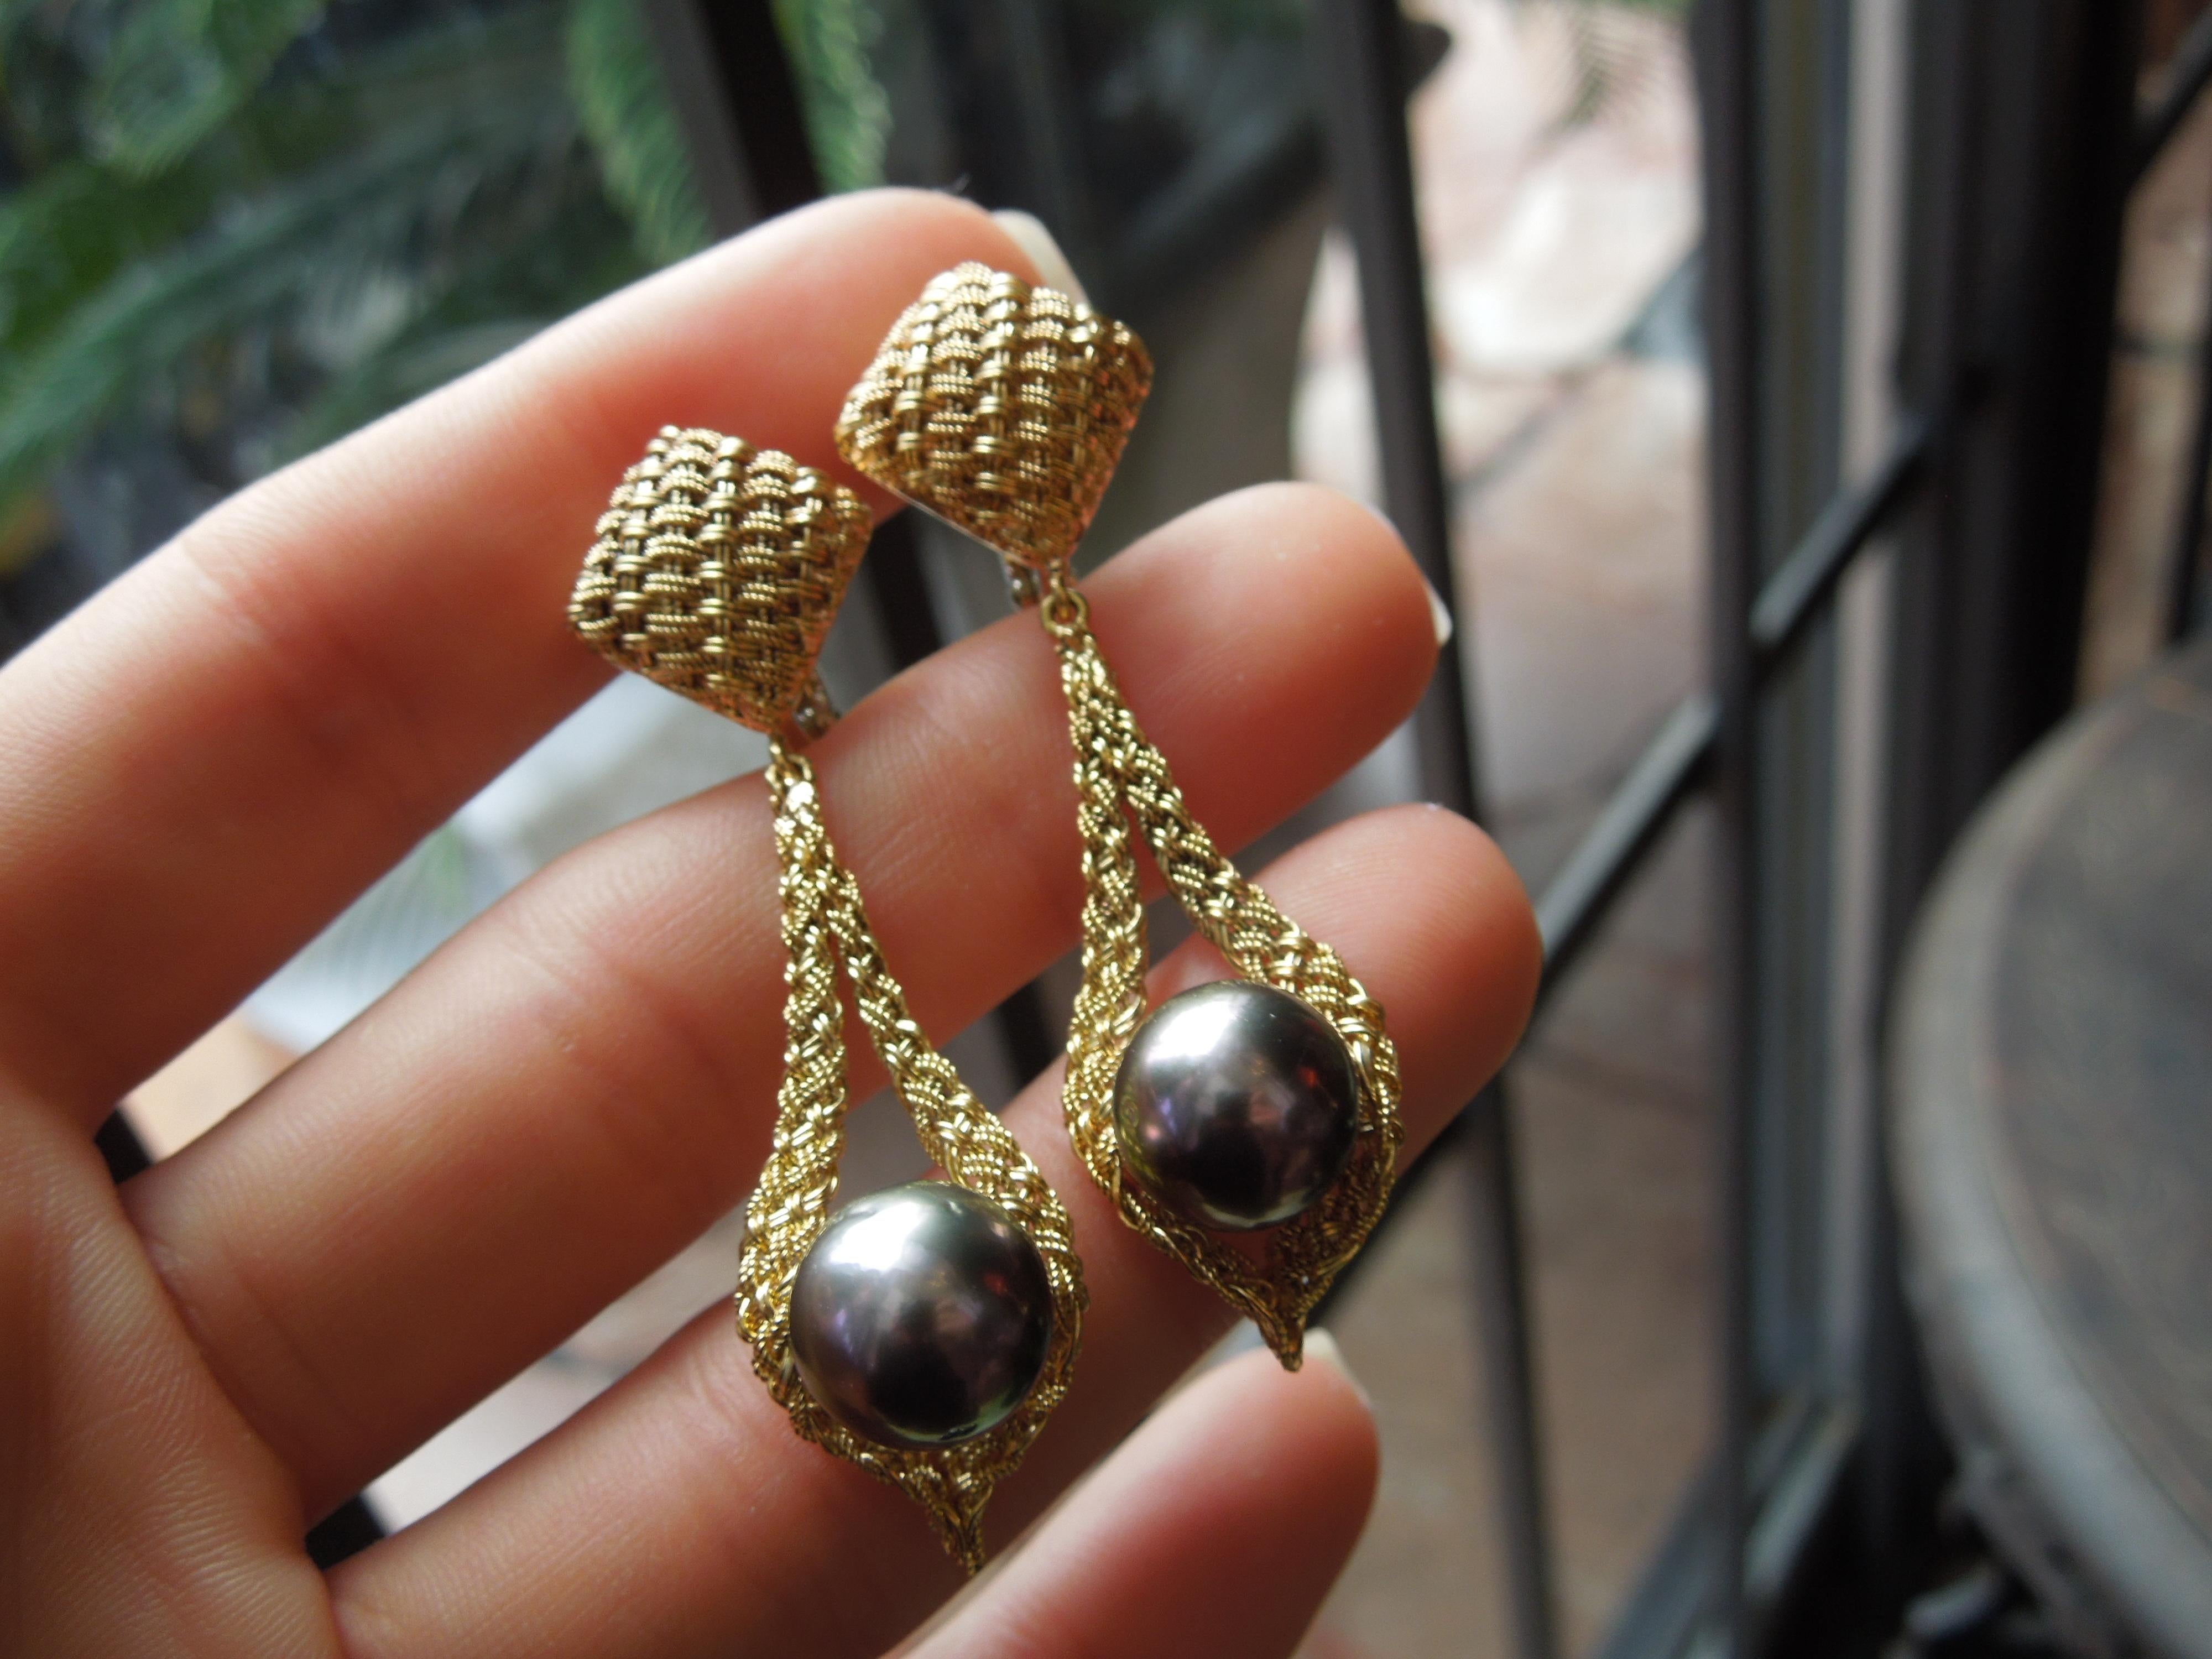 In a pendulum style, tailored for comfort, with hand-tooled Italian Gold mesh work - Truly a lost art in jewelry today.. Modern-day goldsmiths no longer use these techniques.. With Black Peacock Natural Tahitian South Sea Pearls becoming much more